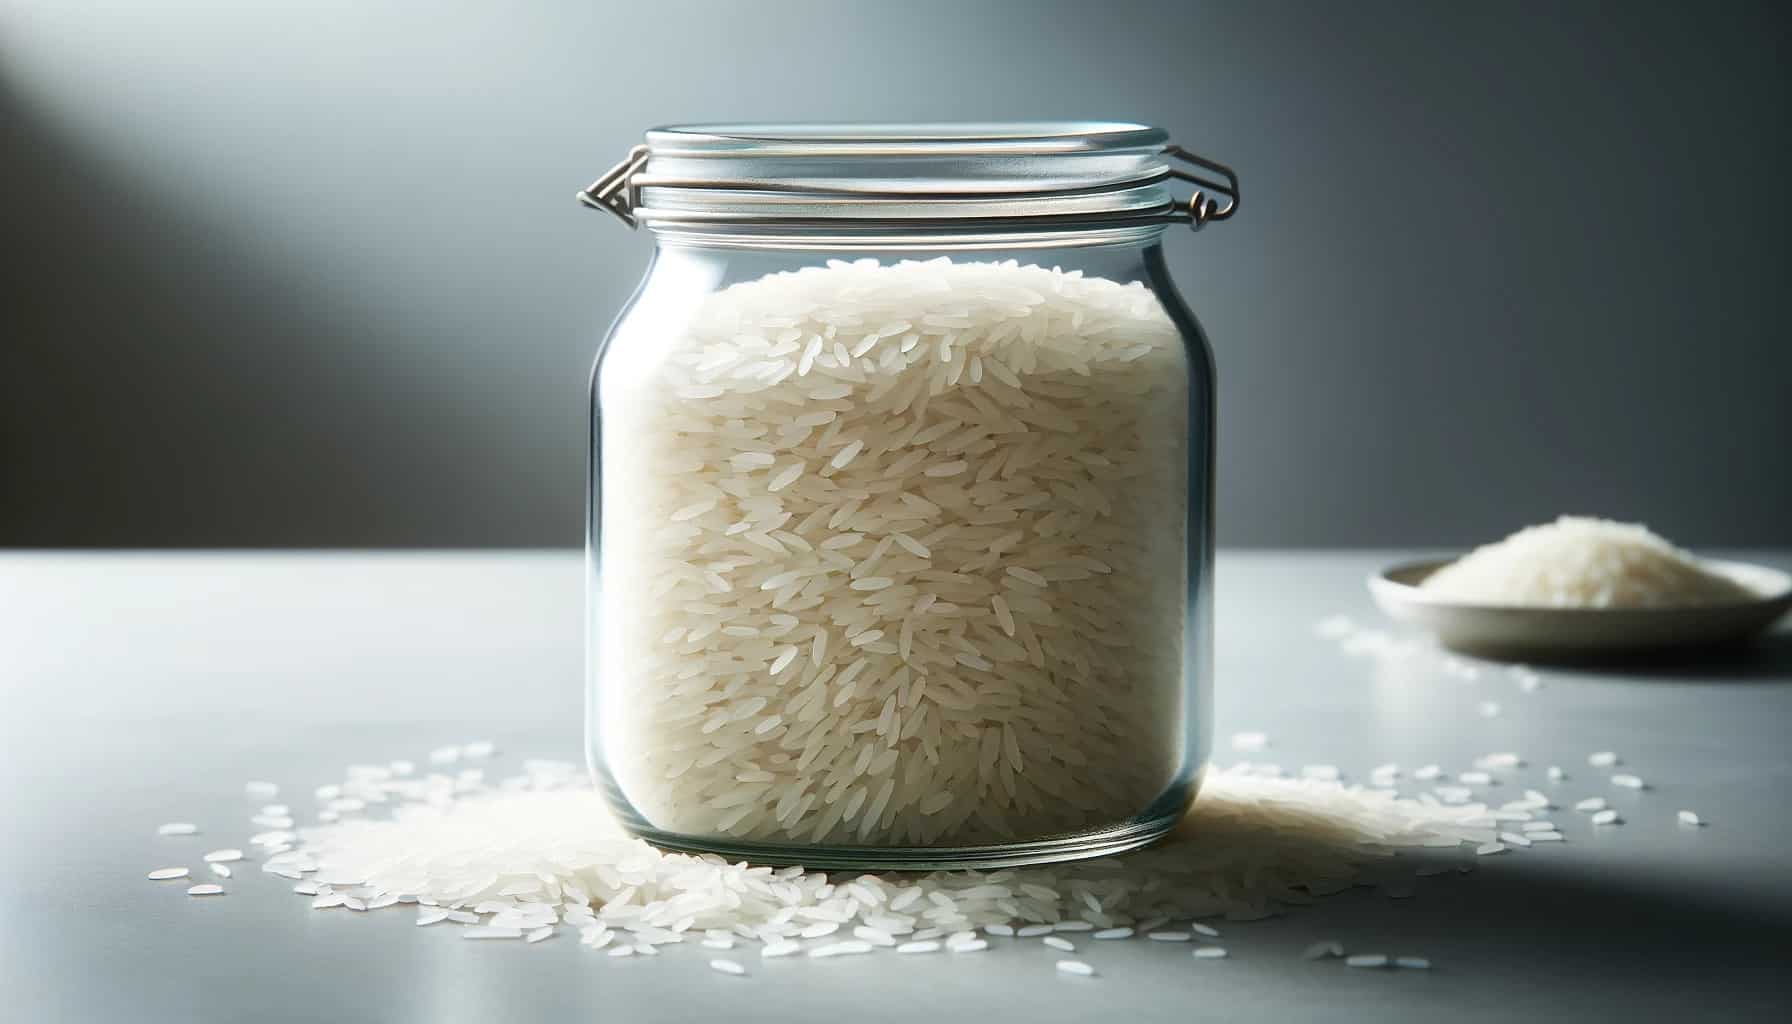 White rice in a glass jar